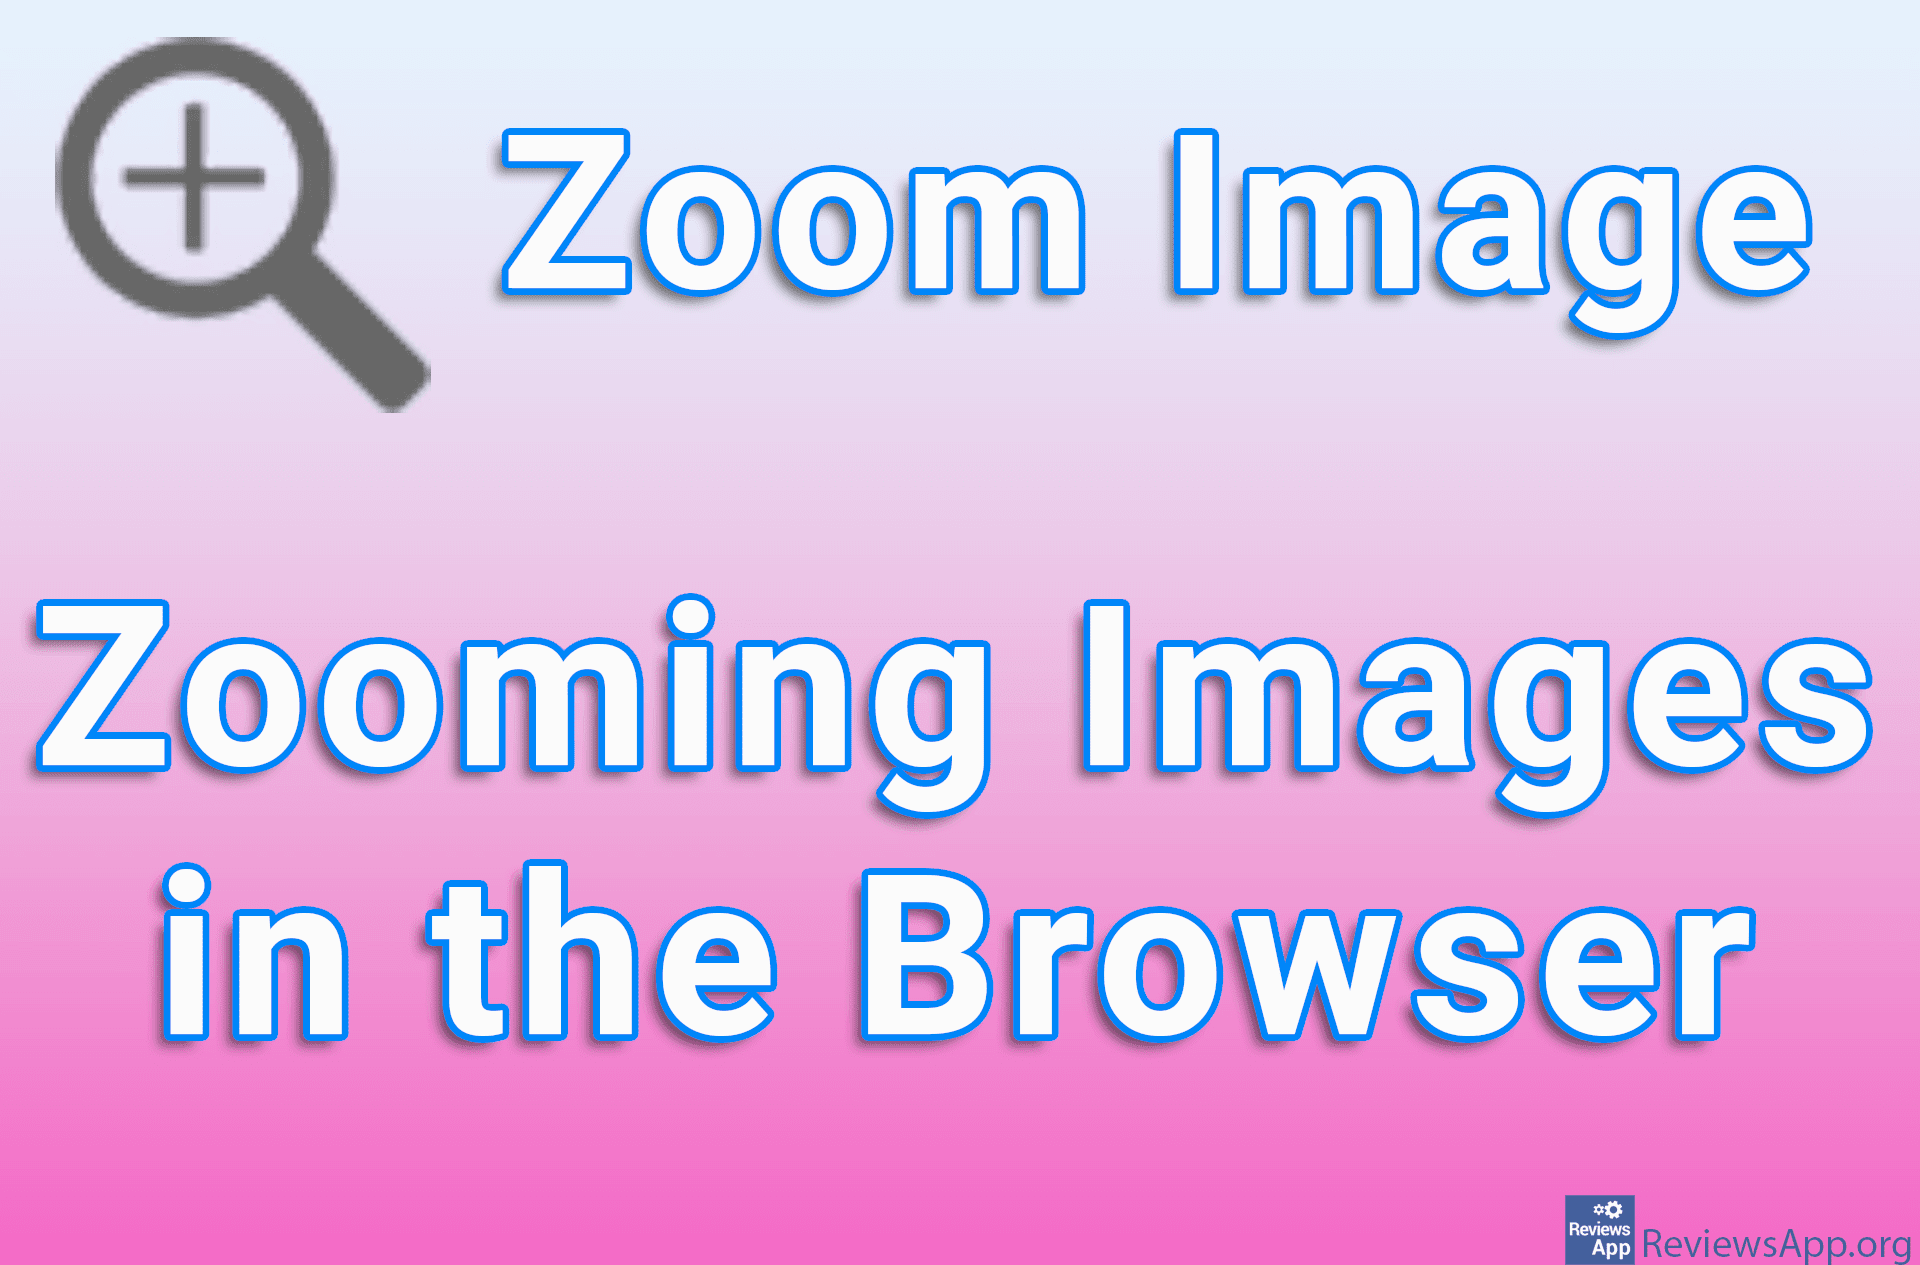 Zoom Image – Zooming Images in the Browser